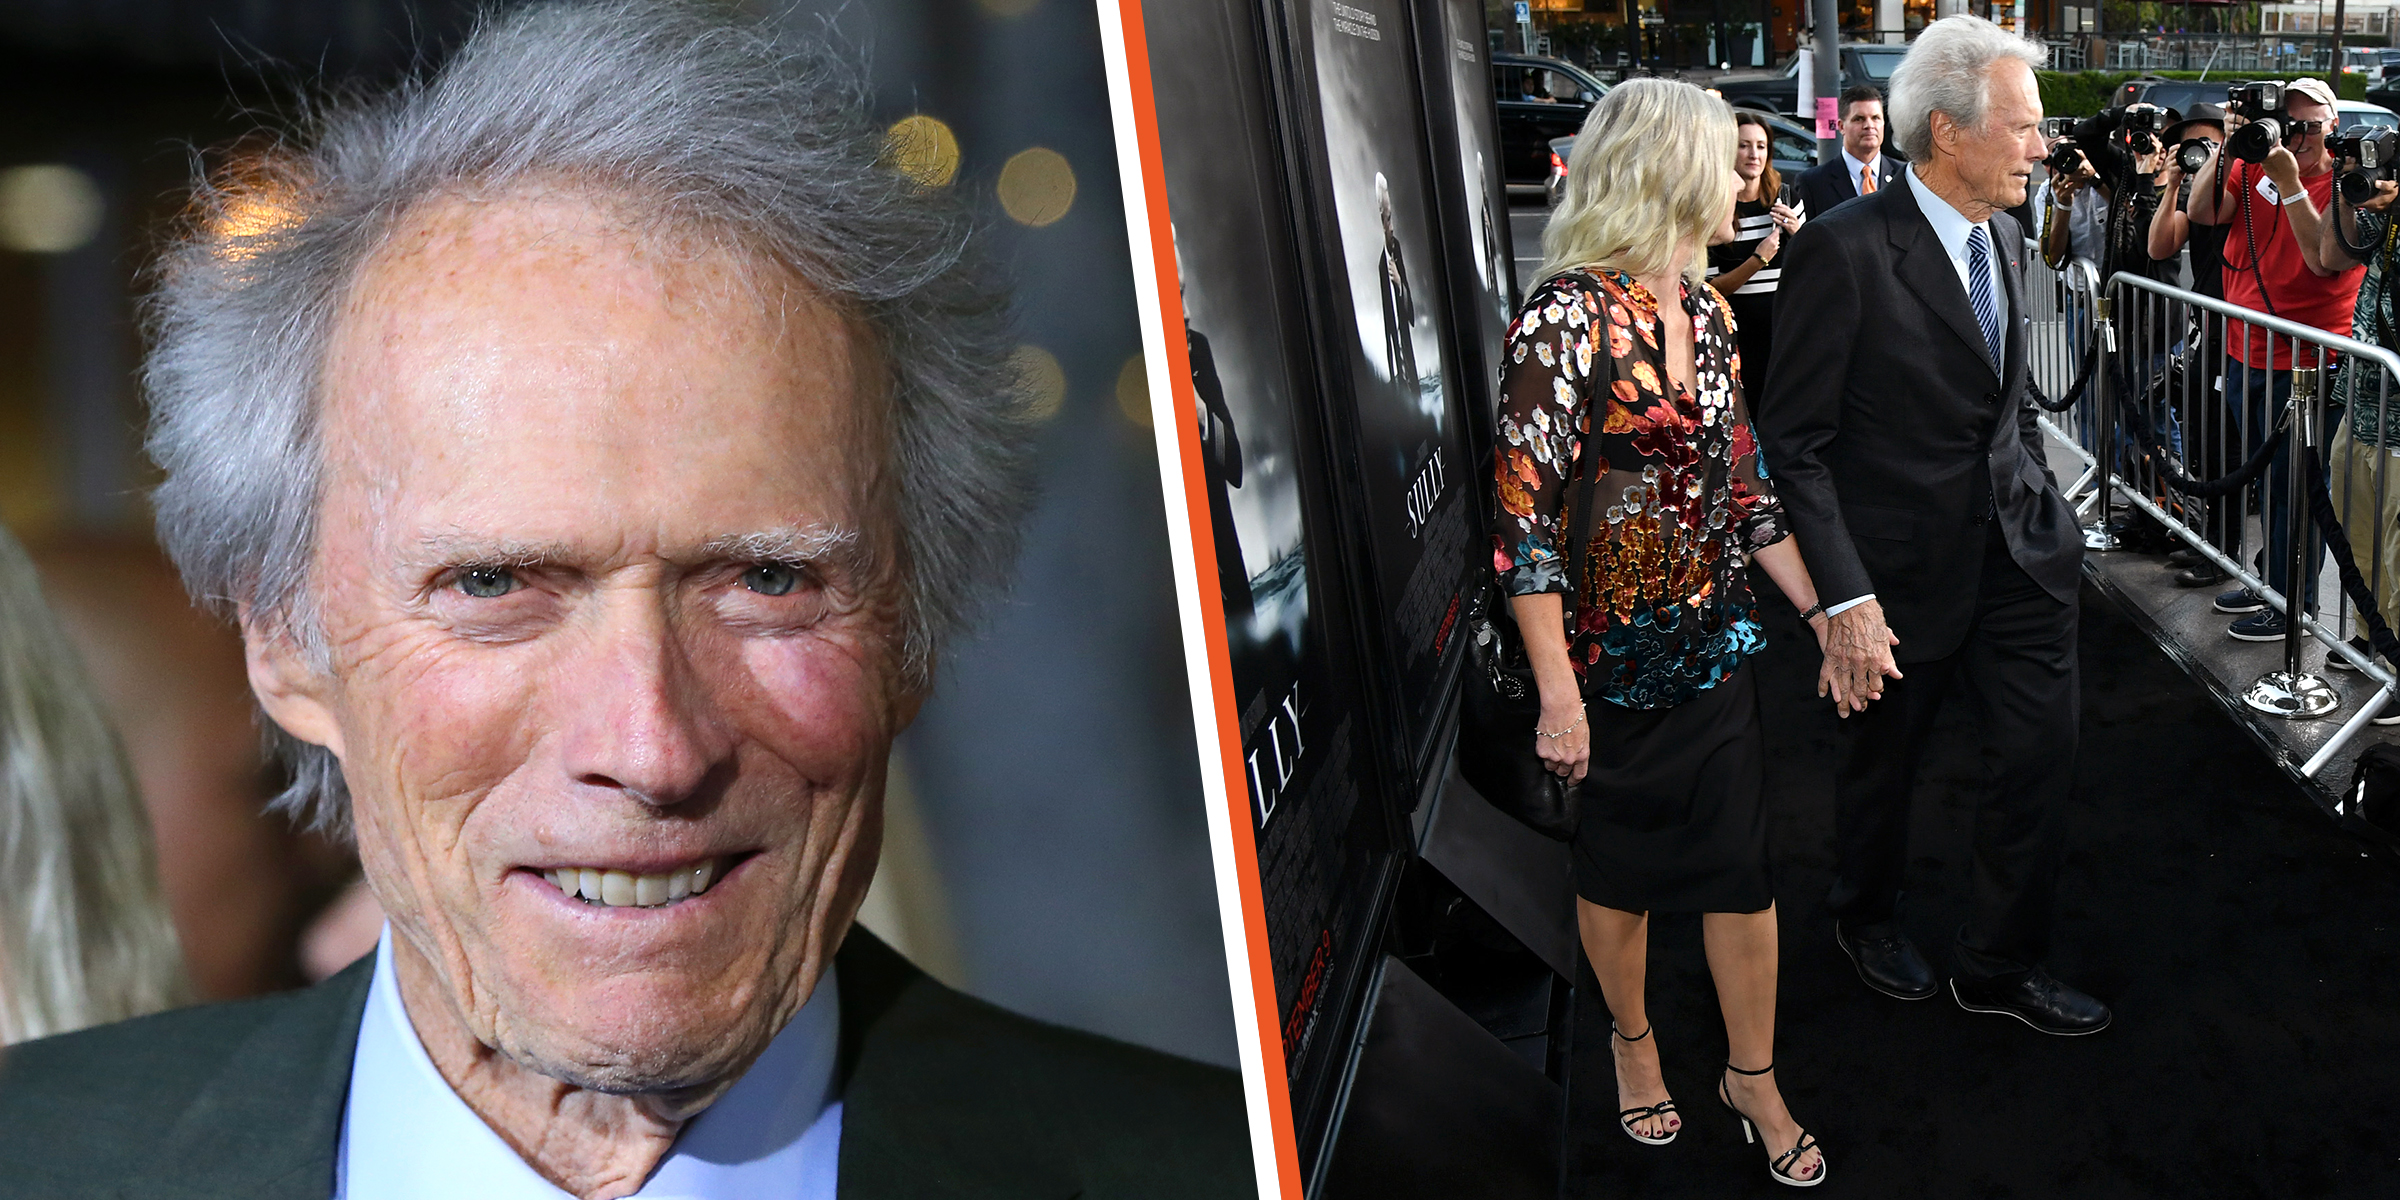 Clint Eastwood | Clint Eastwood and Christina Sandera | Source: Getty Images